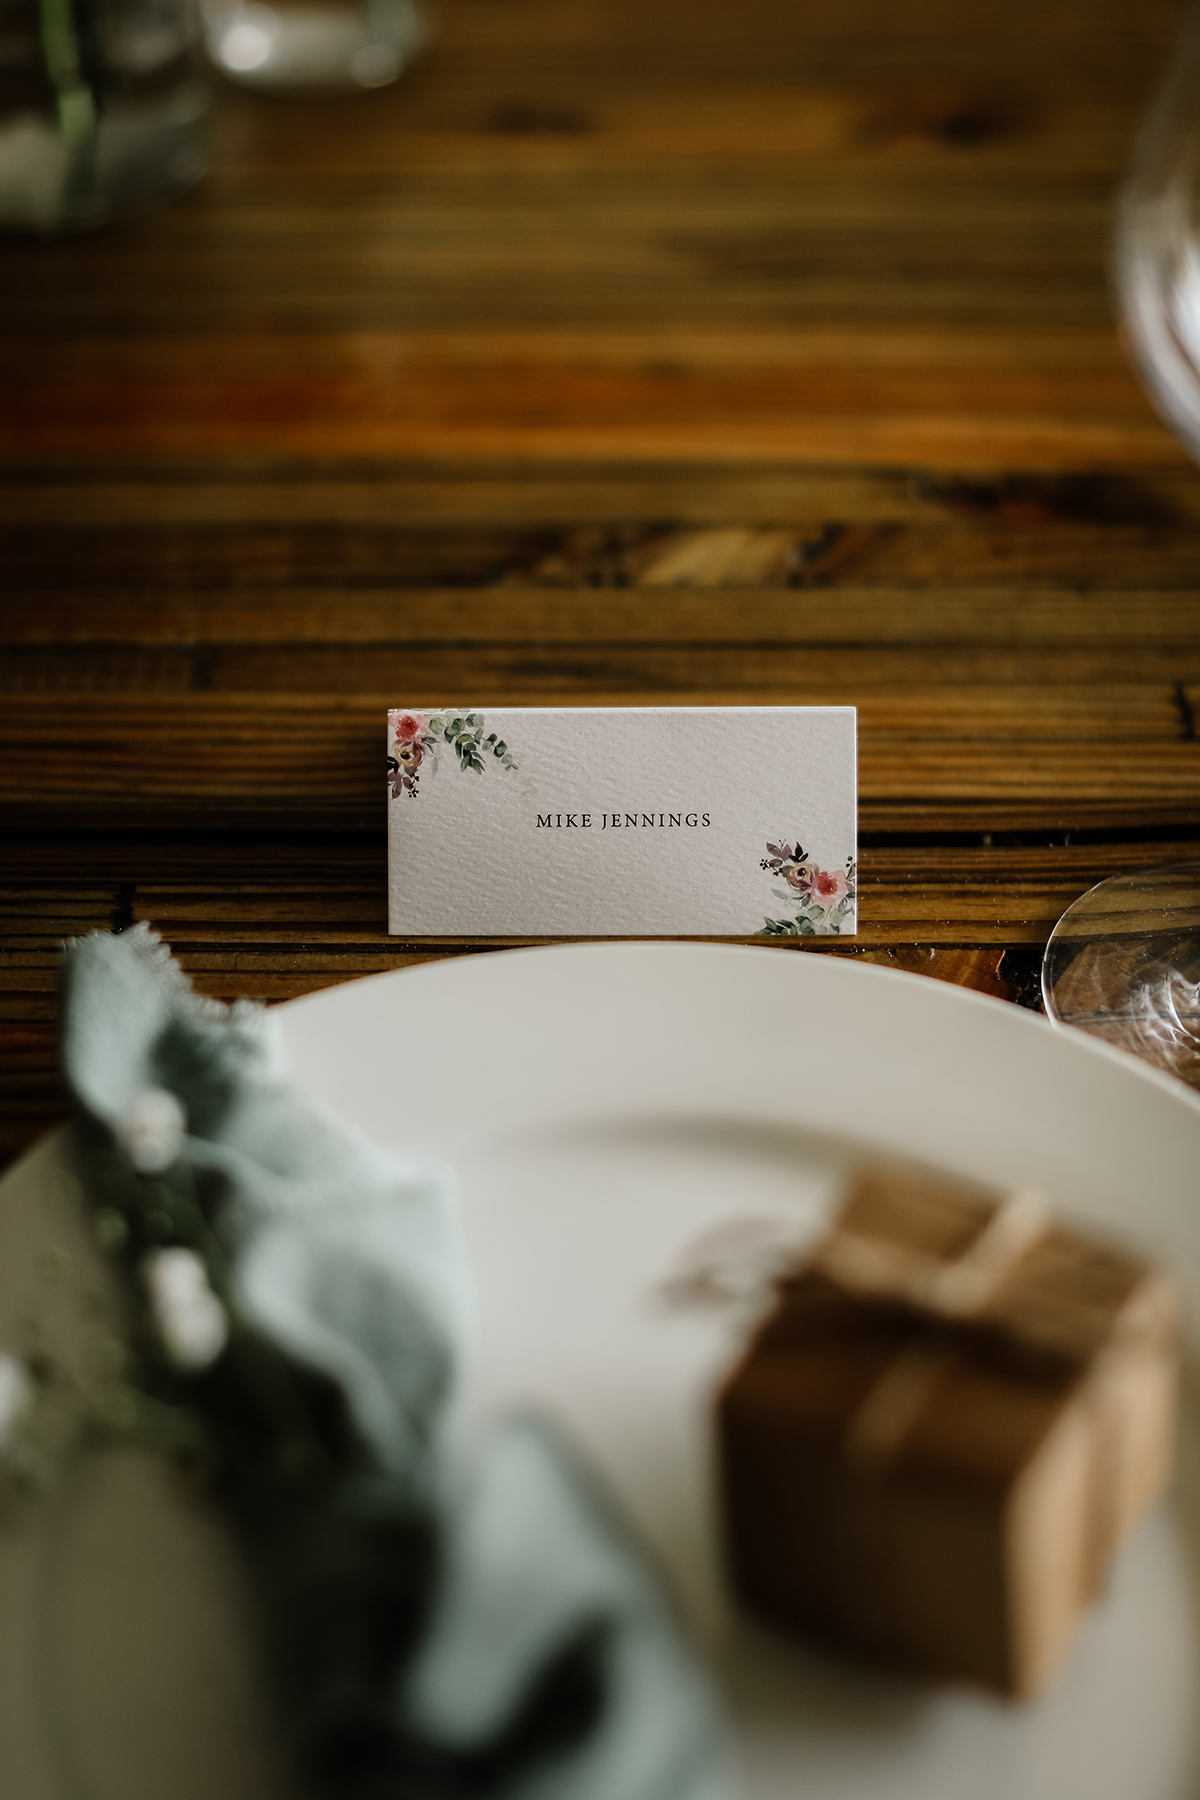 Guest Place Name Card - Seating Place Name - Wedding Day Guest Name Card - Littlewood Vineyard Wedding Photographer